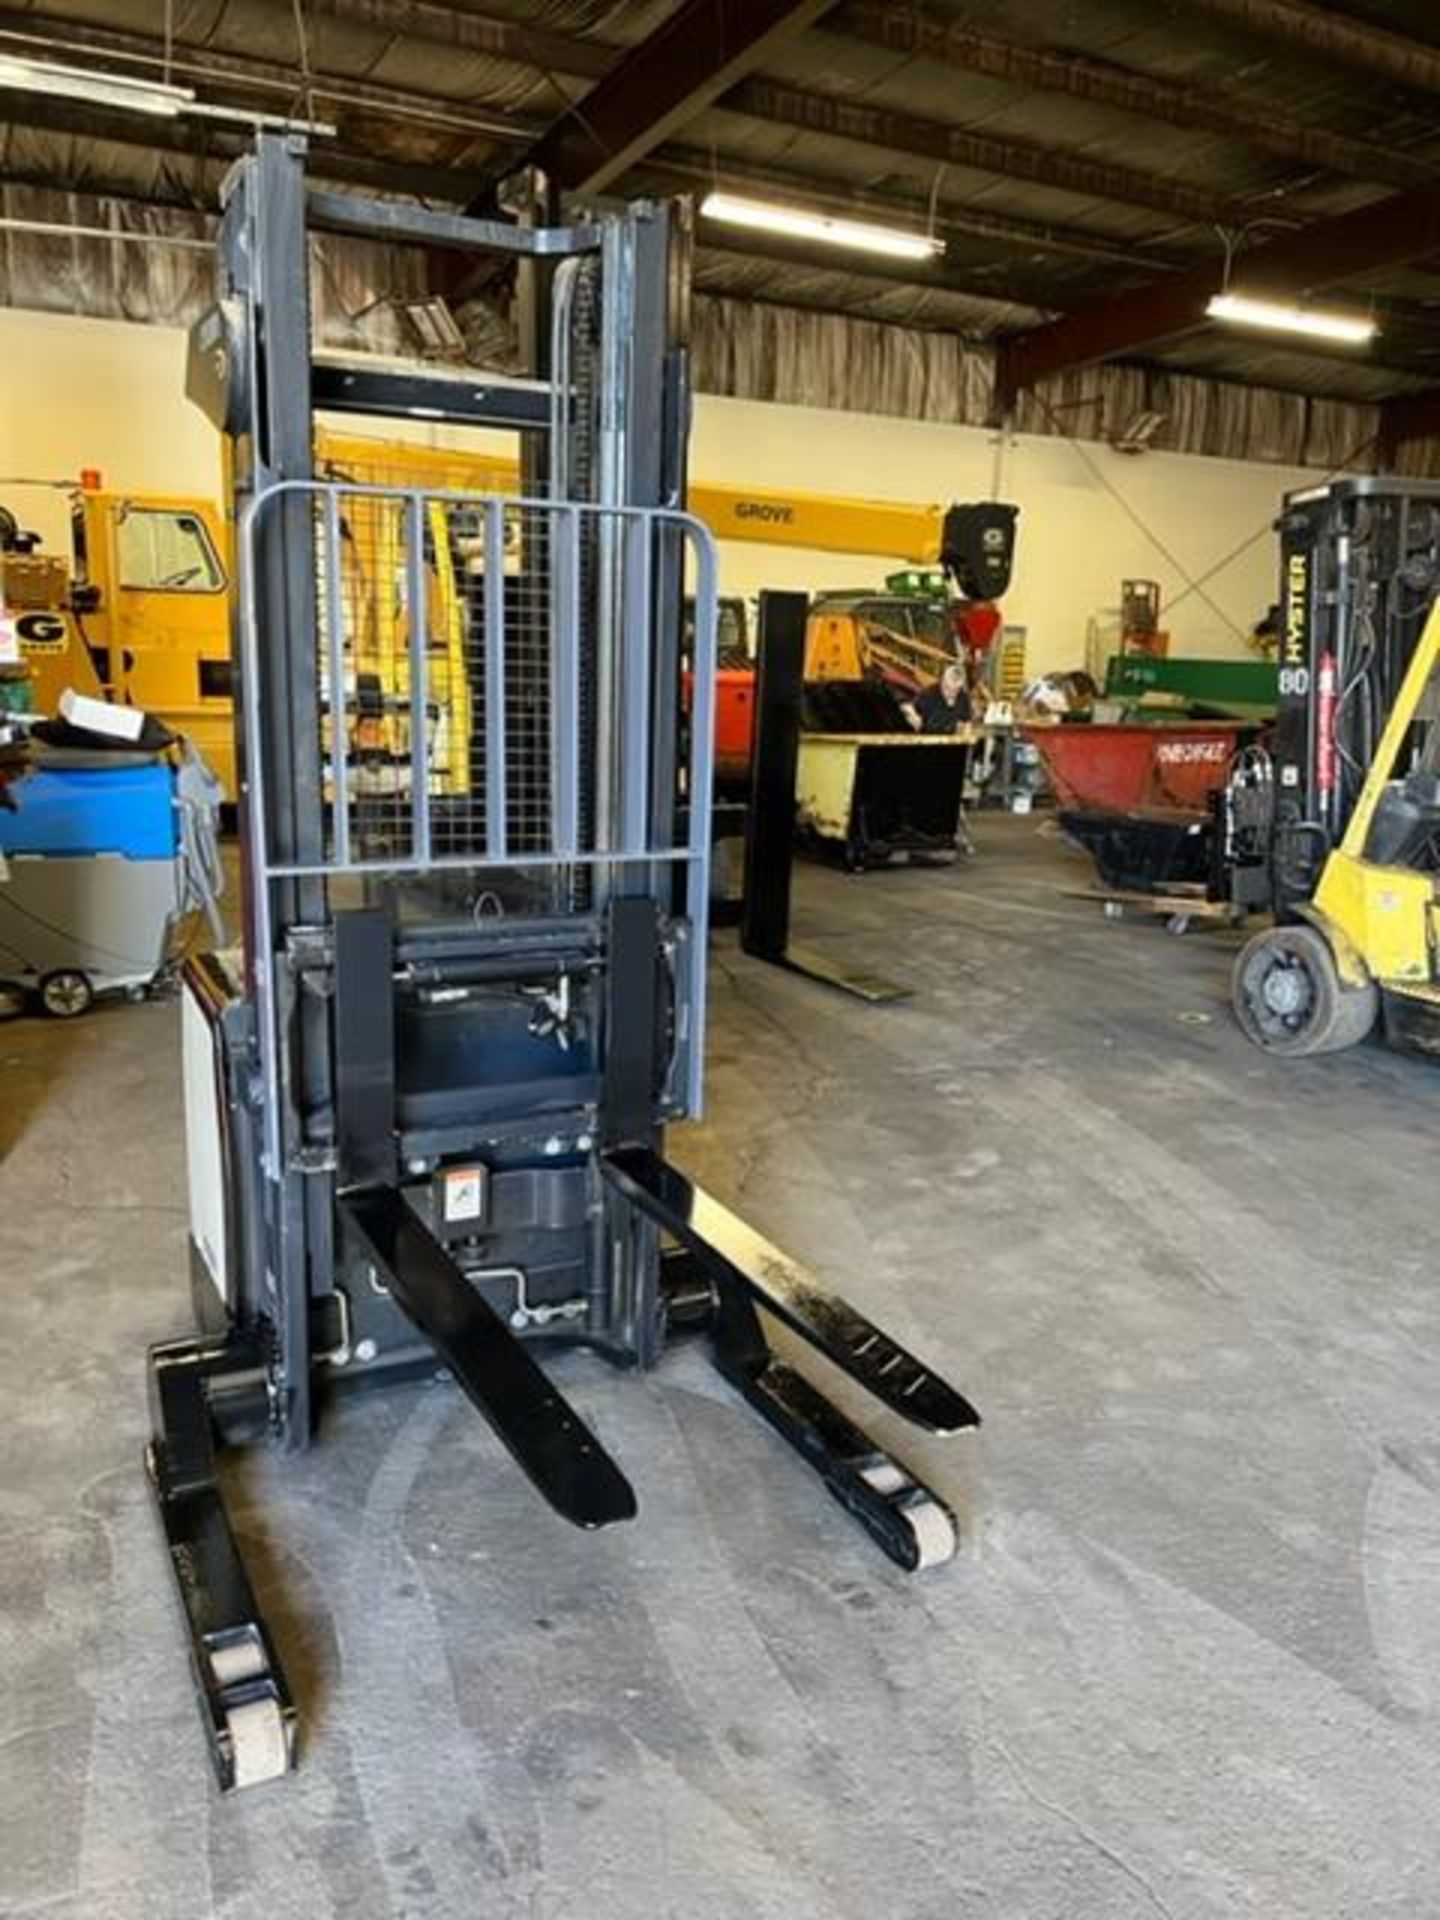 FREE CUSTOMS - Crown Pallet Stacker Walk Behind Order Picker 2500lbs capacity electric with - Image 2 of 4